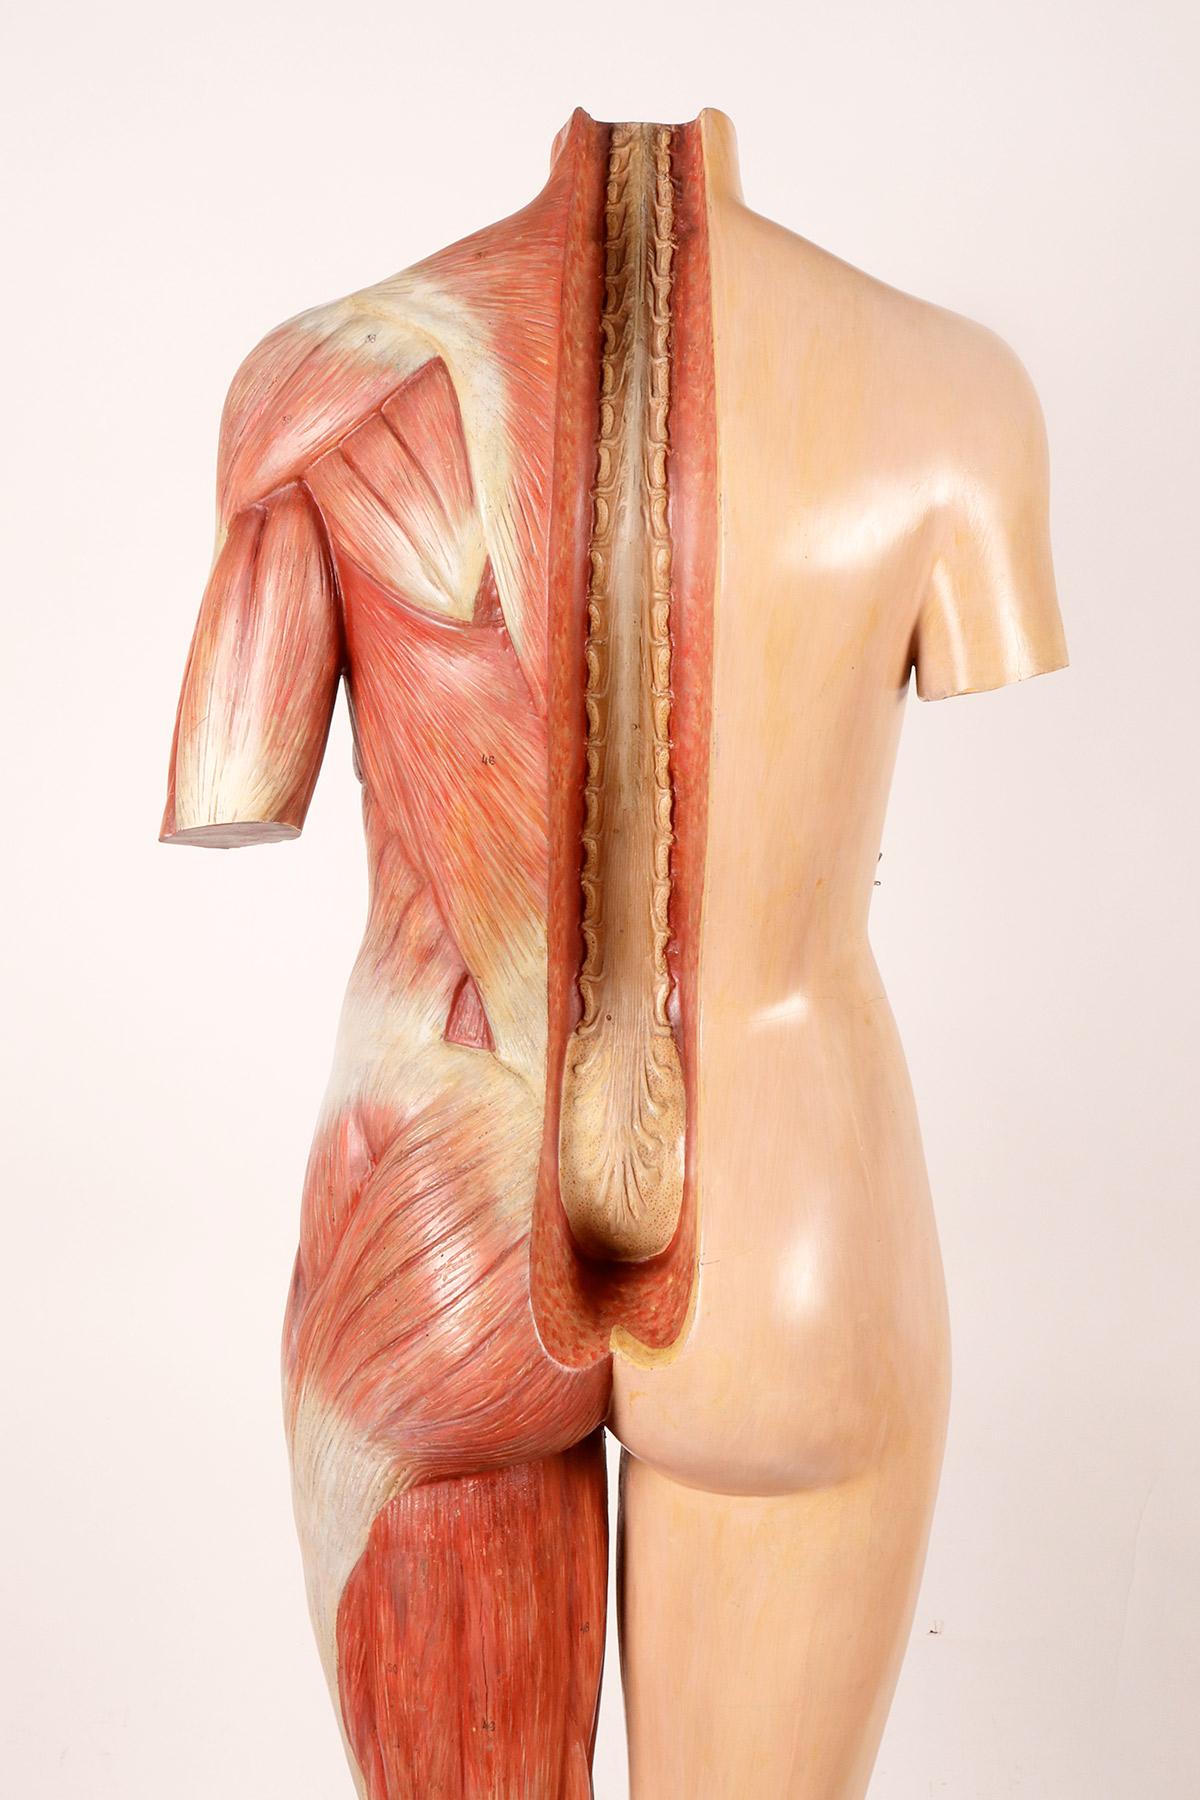 Resin Anatomical model: a male human body in life-size proportions, Italy 1930.  For Sale